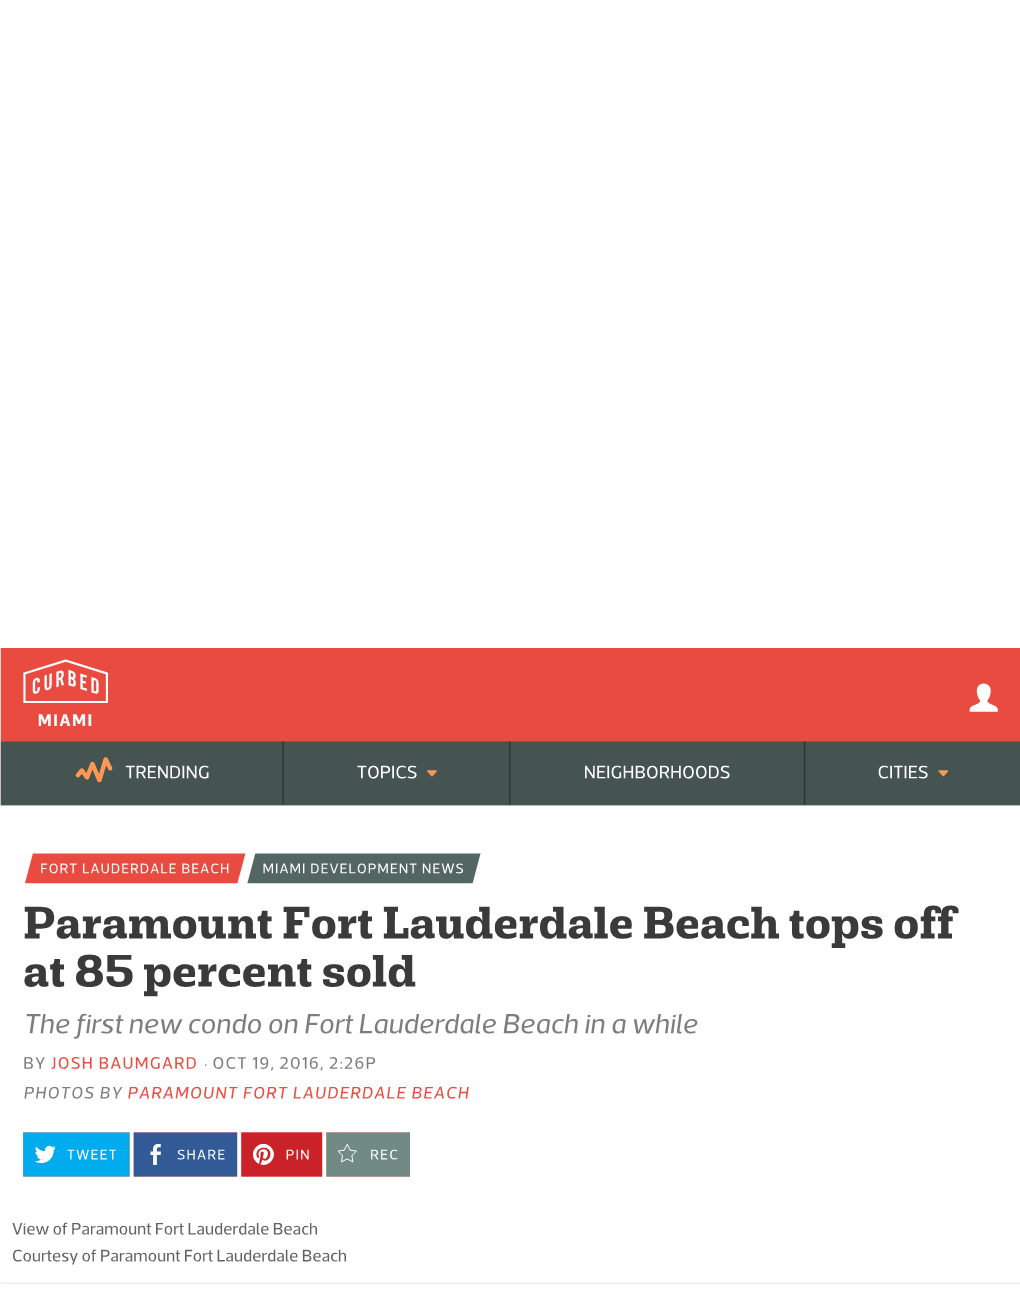 Paramount Fort Lauderdale Beach Tops Off at 85 Percent Sold the First New Condo on Fort Lauderdale Beach in a While